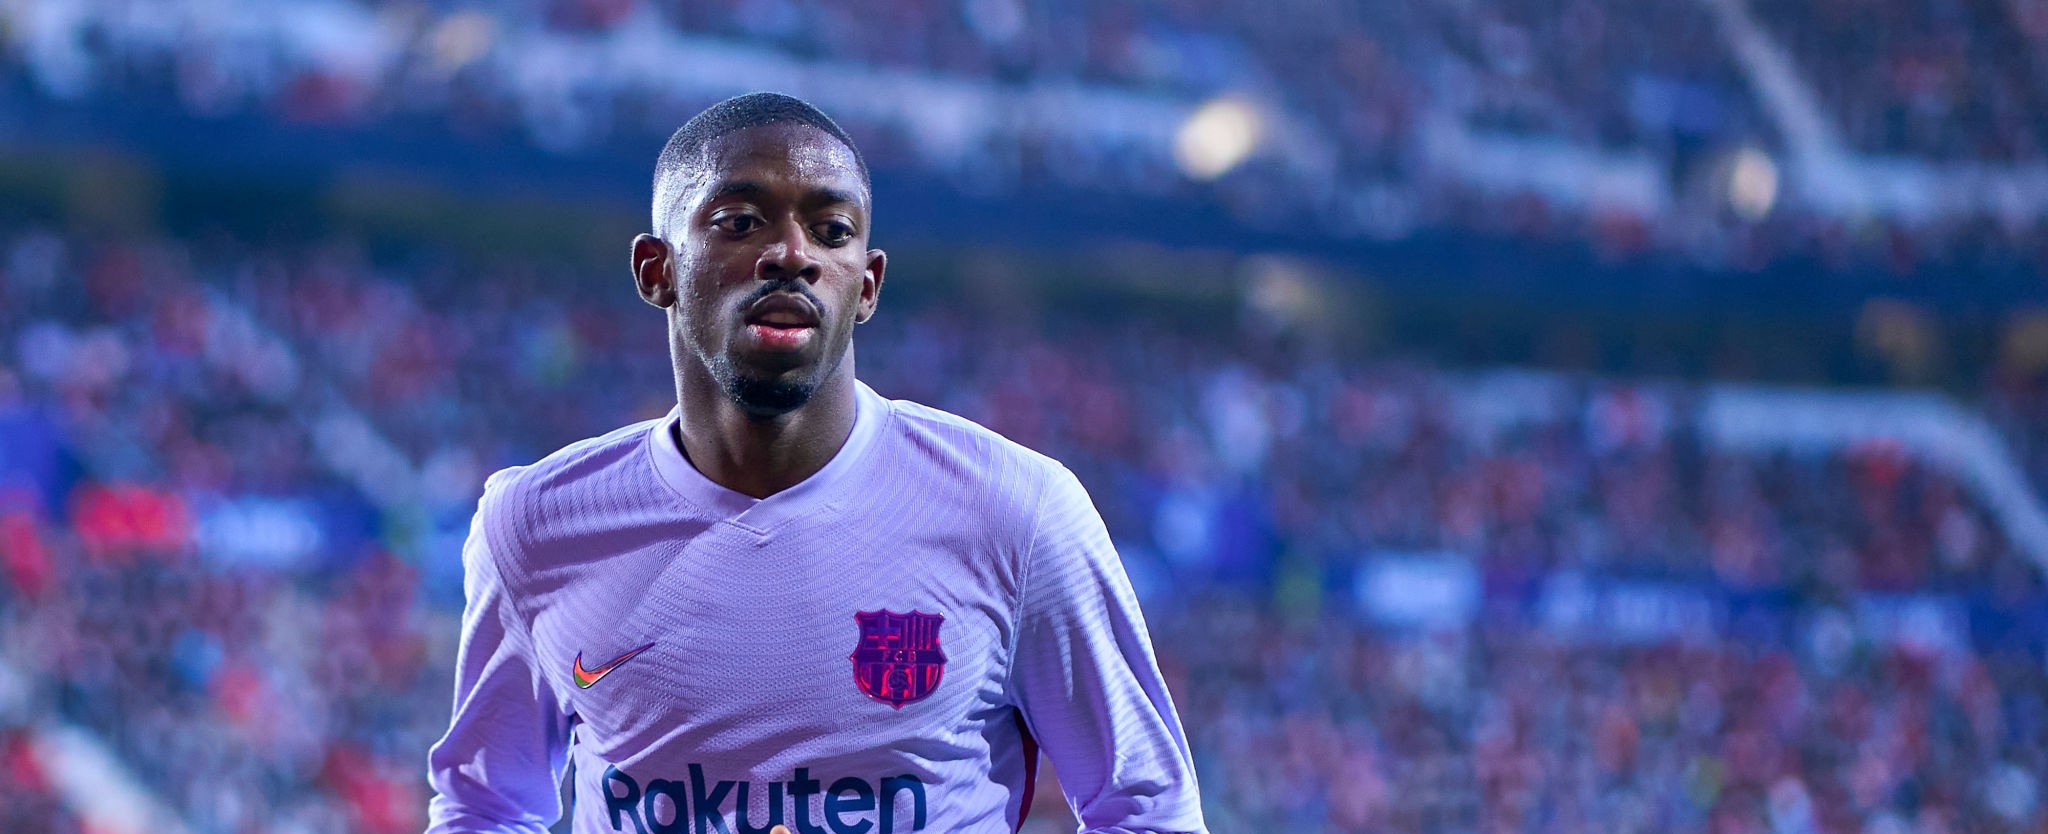 Who is Ousmane Dembele Married to